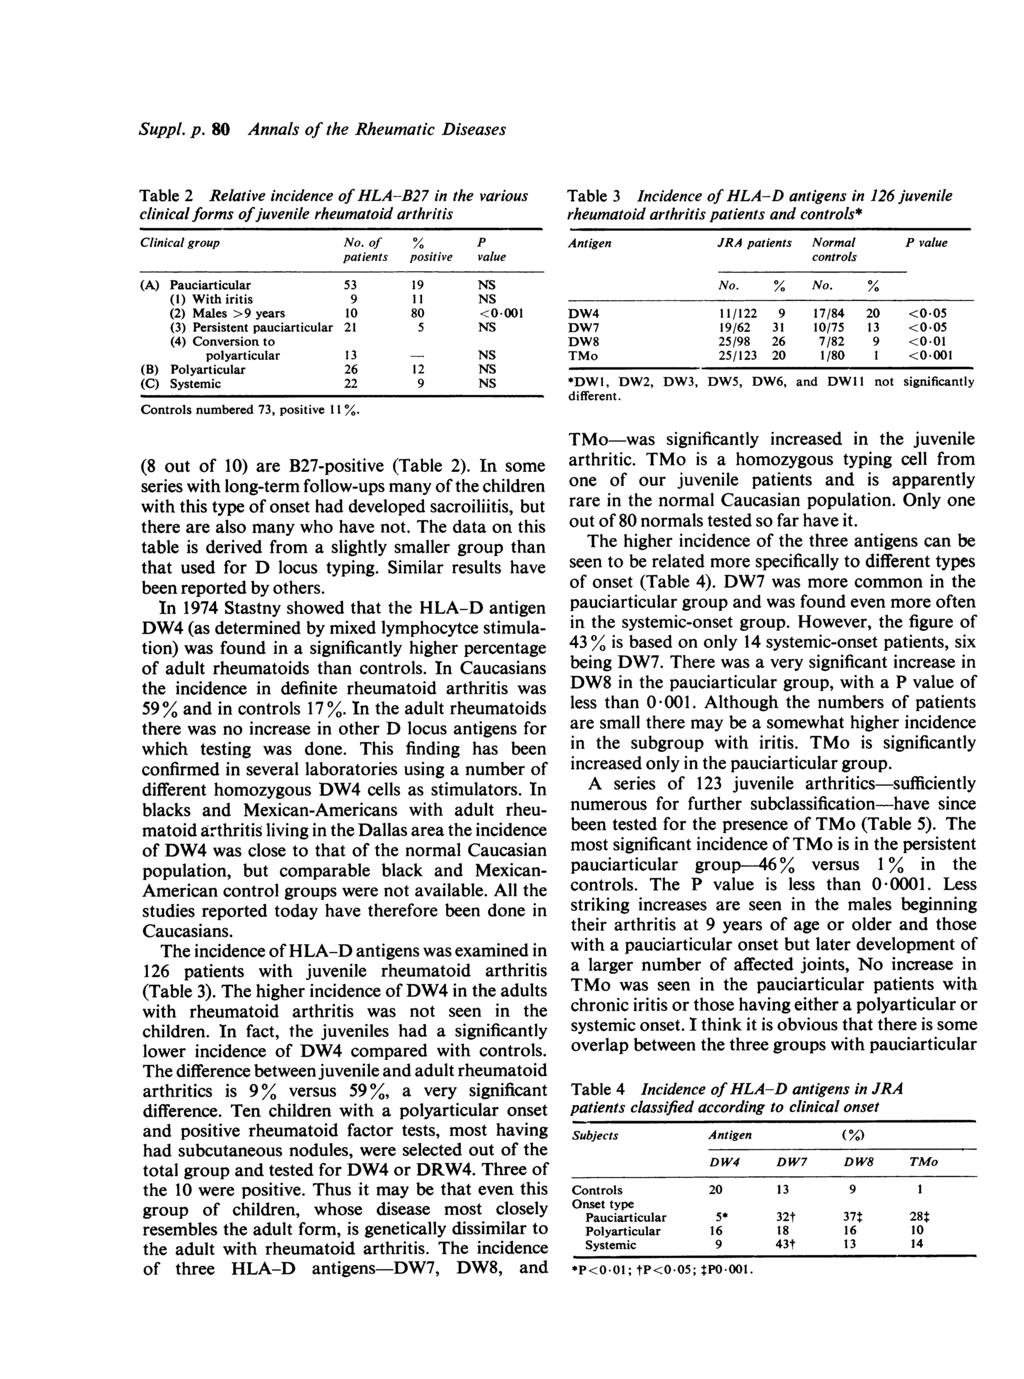 Suppl. p. 80 Annals of the Rheumatic Diseases Table 2 Relative incidence of HLA-B27 in the various clinical forms ofjuvenile rheumatoid arthritis Clinical group No.